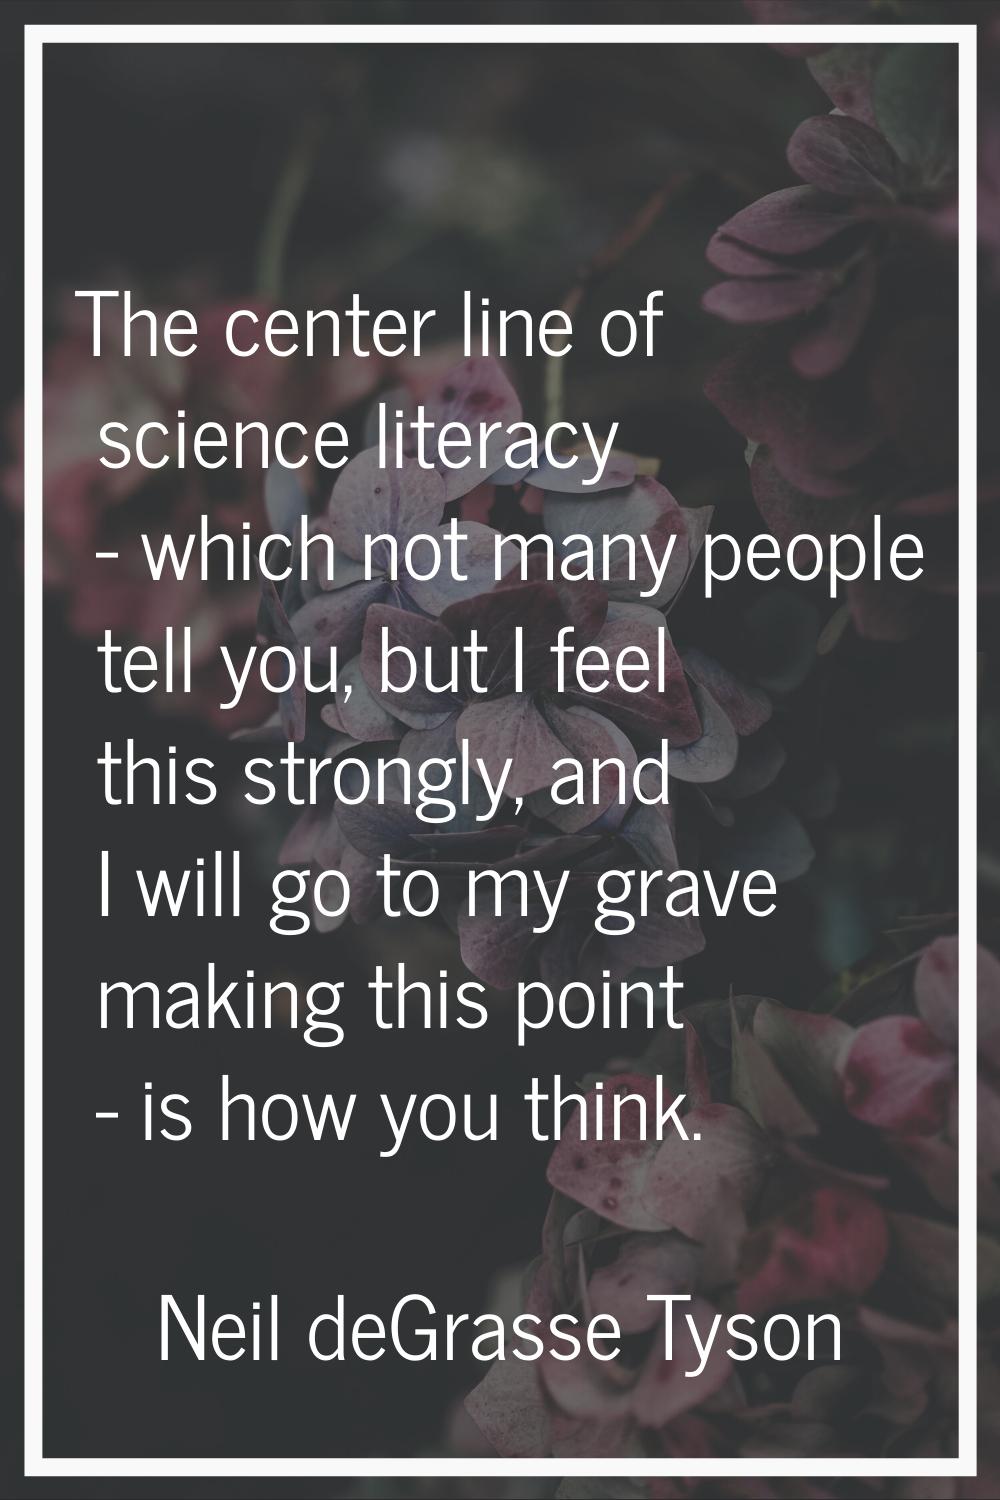 The center line of science literacy - which not many people tell you, but I feel this strongly, and